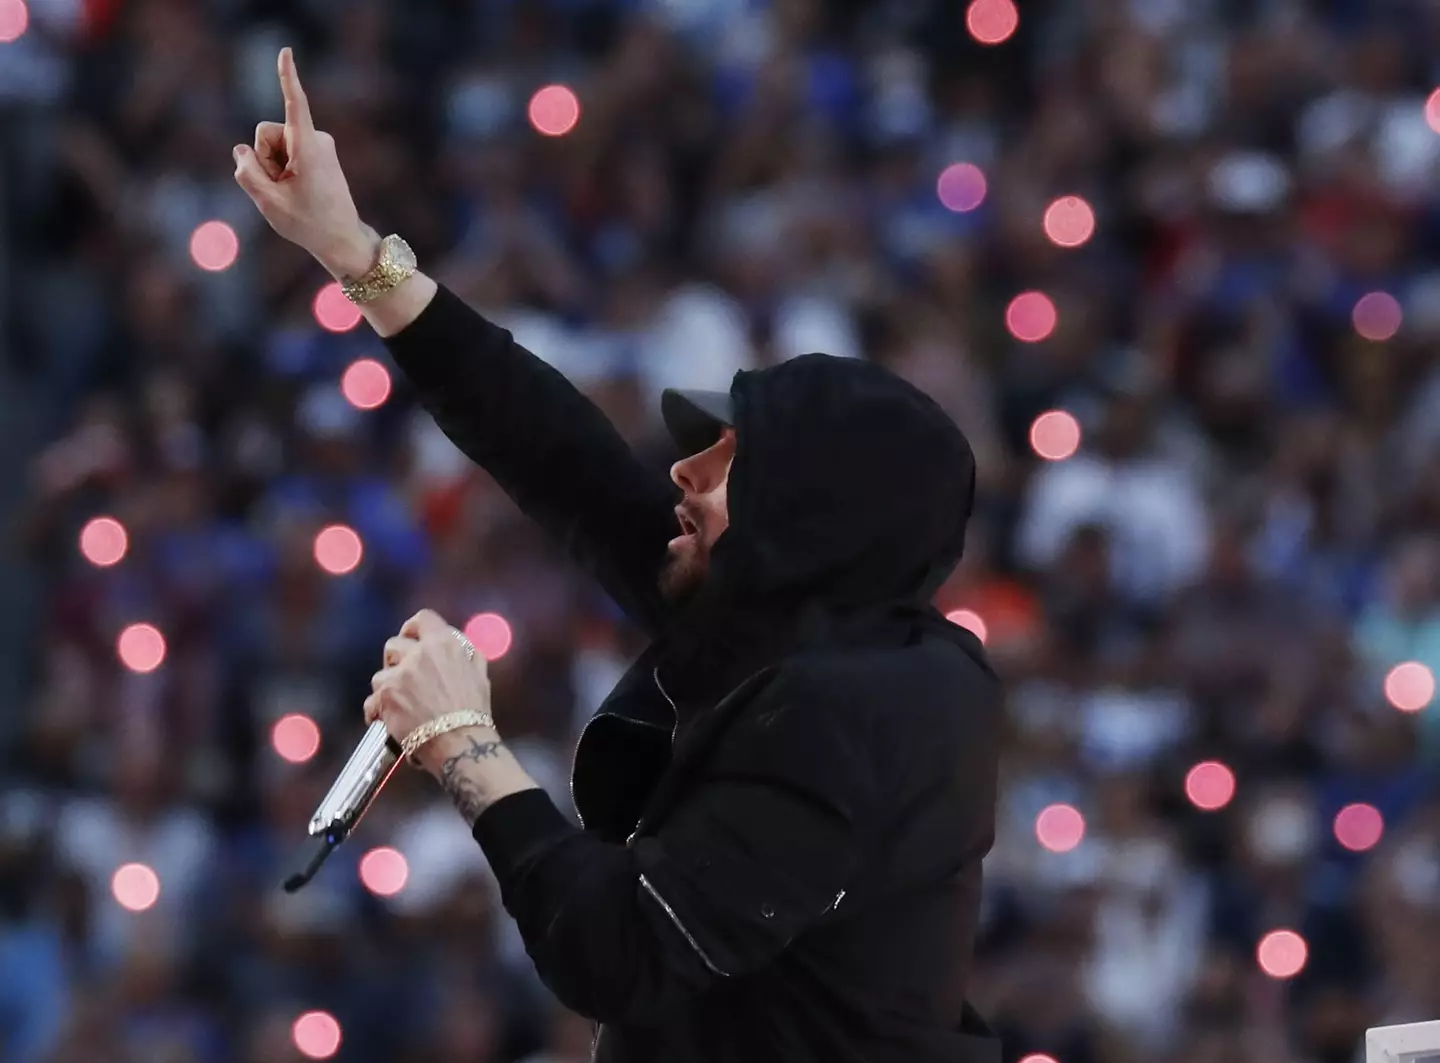 Eminem has been added to the Rock & Roll Hall of Fame.